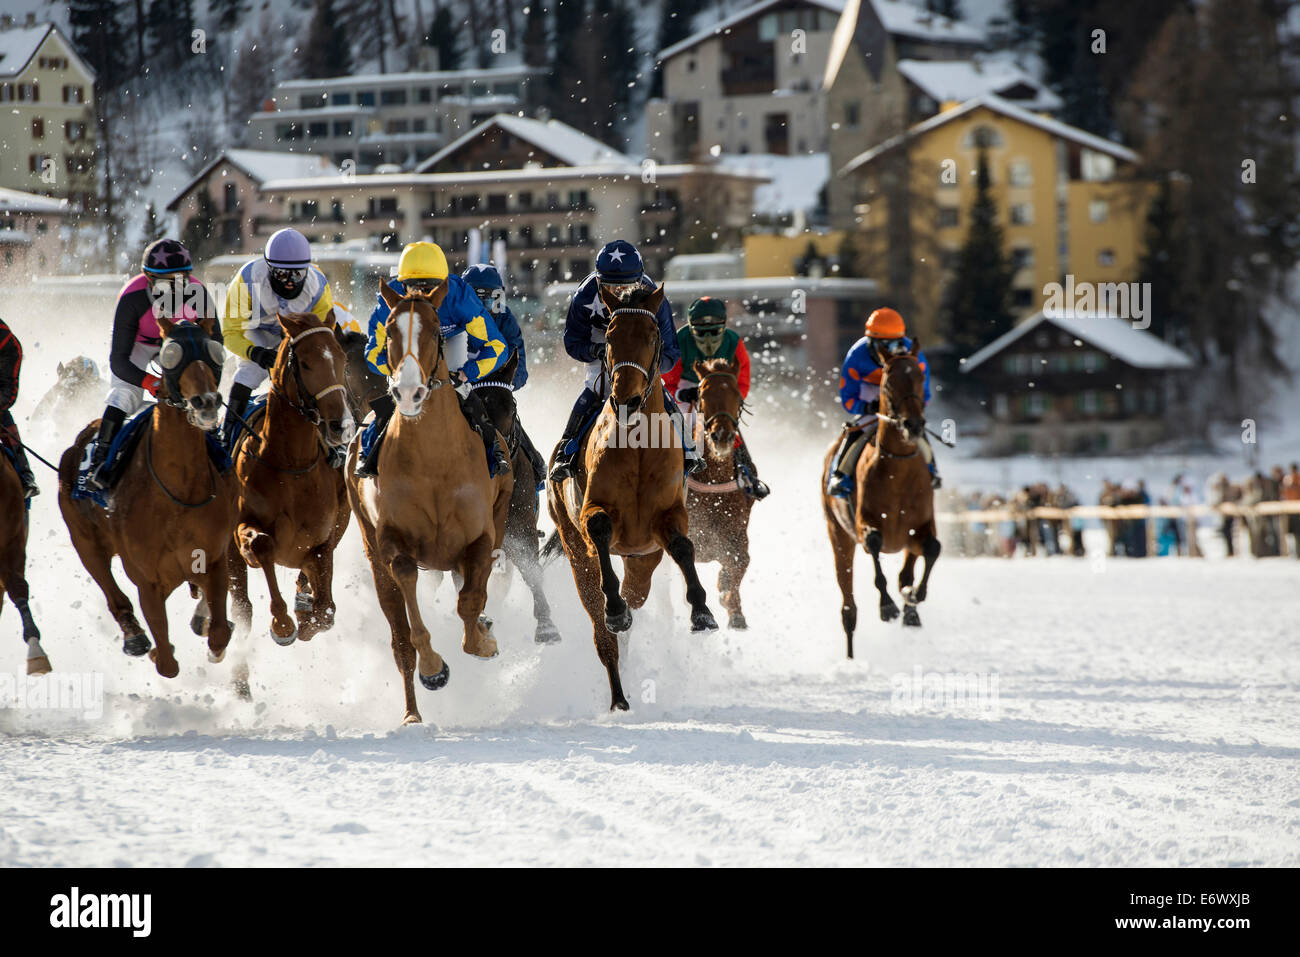 160 White Turf St Moritz 2013 Stock Photos, High-Res Pictures, and Images -  Getty Images